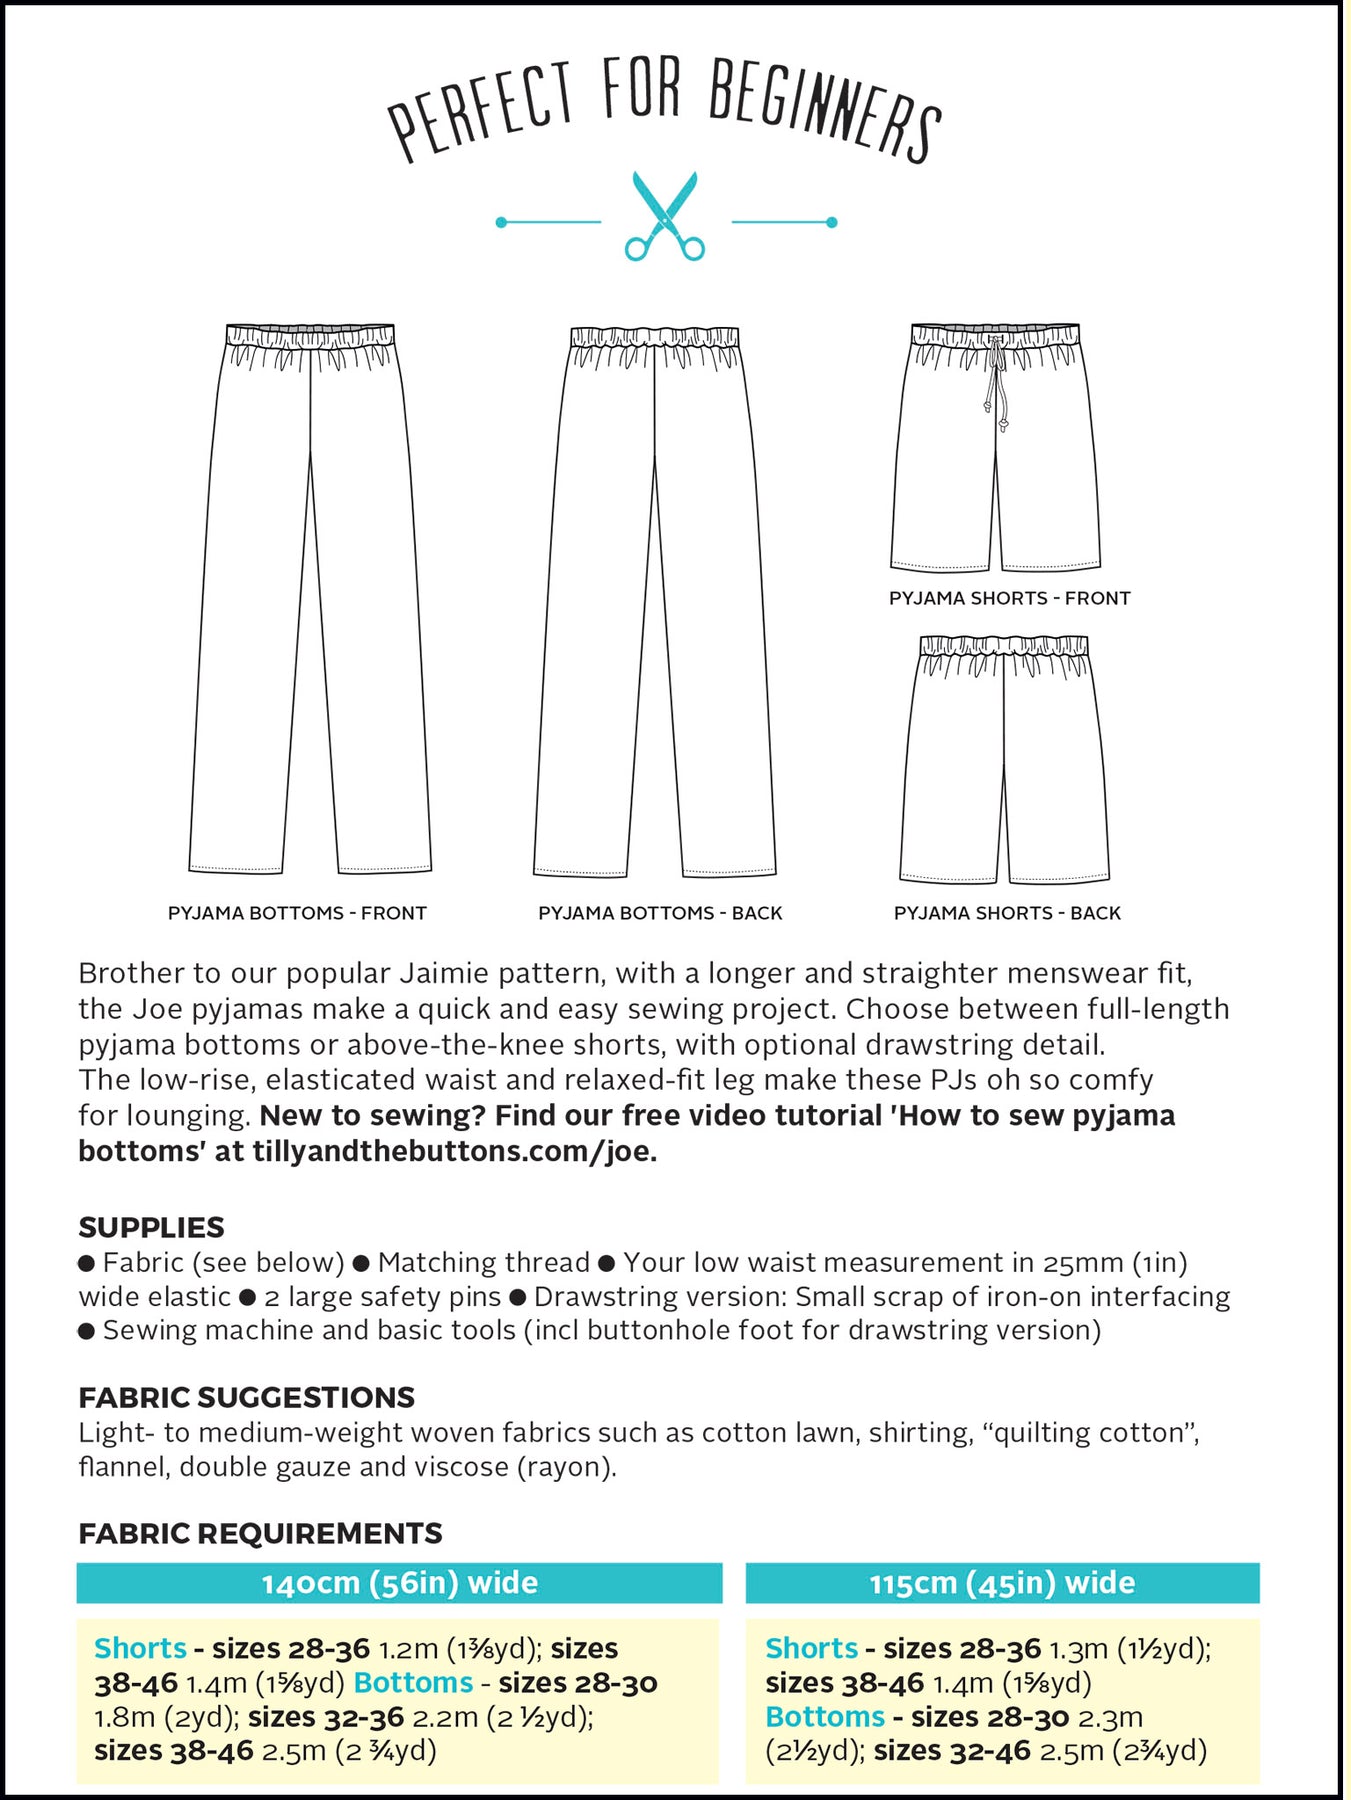 Sweatpants Pattern: A Quick And Easy Sewing Project To Make